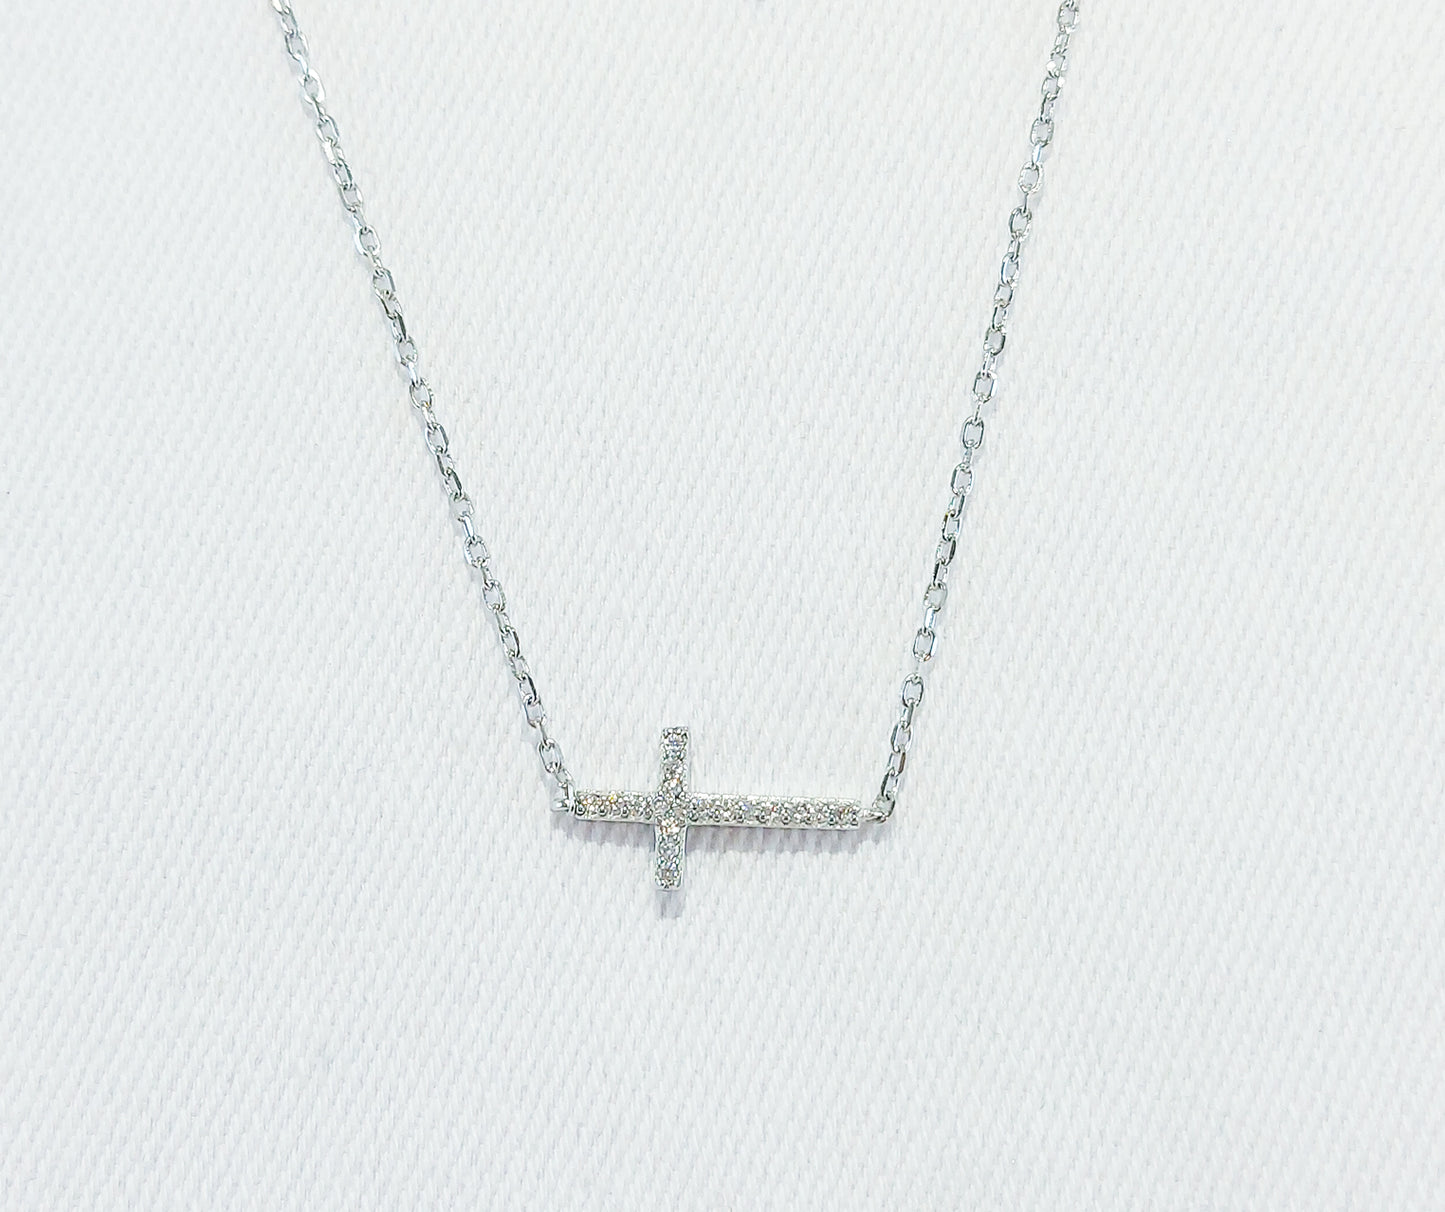 Sterling Silver Cross Necklace with Cubic Zirconia Stones